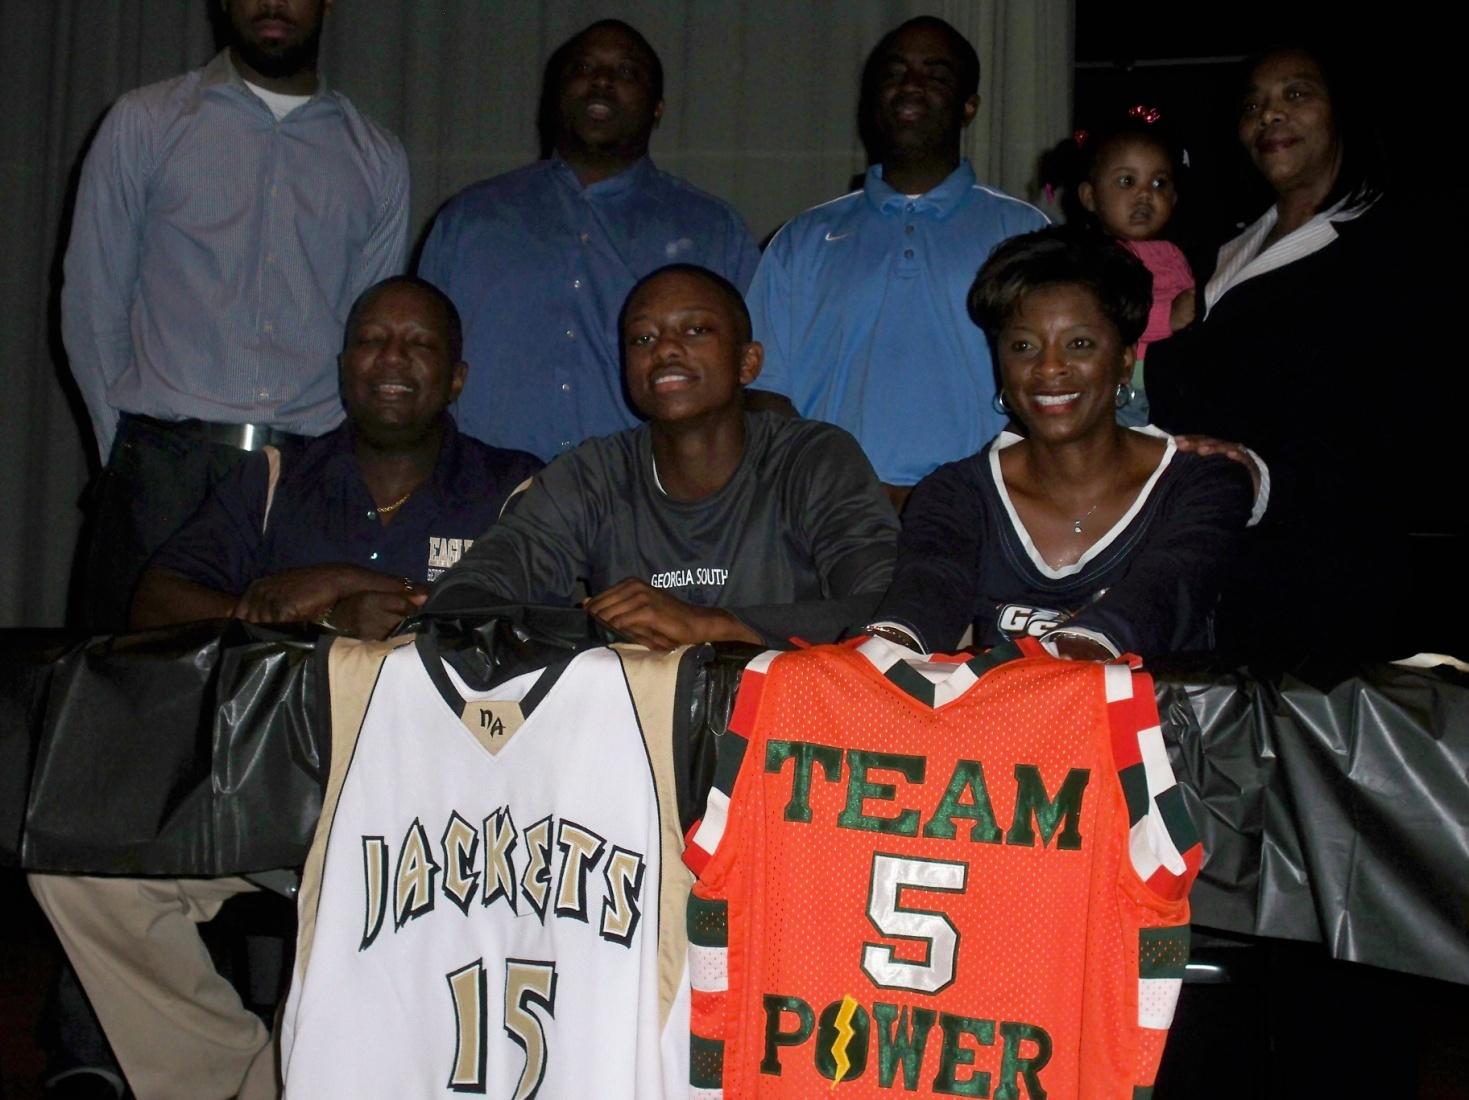 Team Power 2011 – “Jessie Pernell” Signs with Georgia Southern